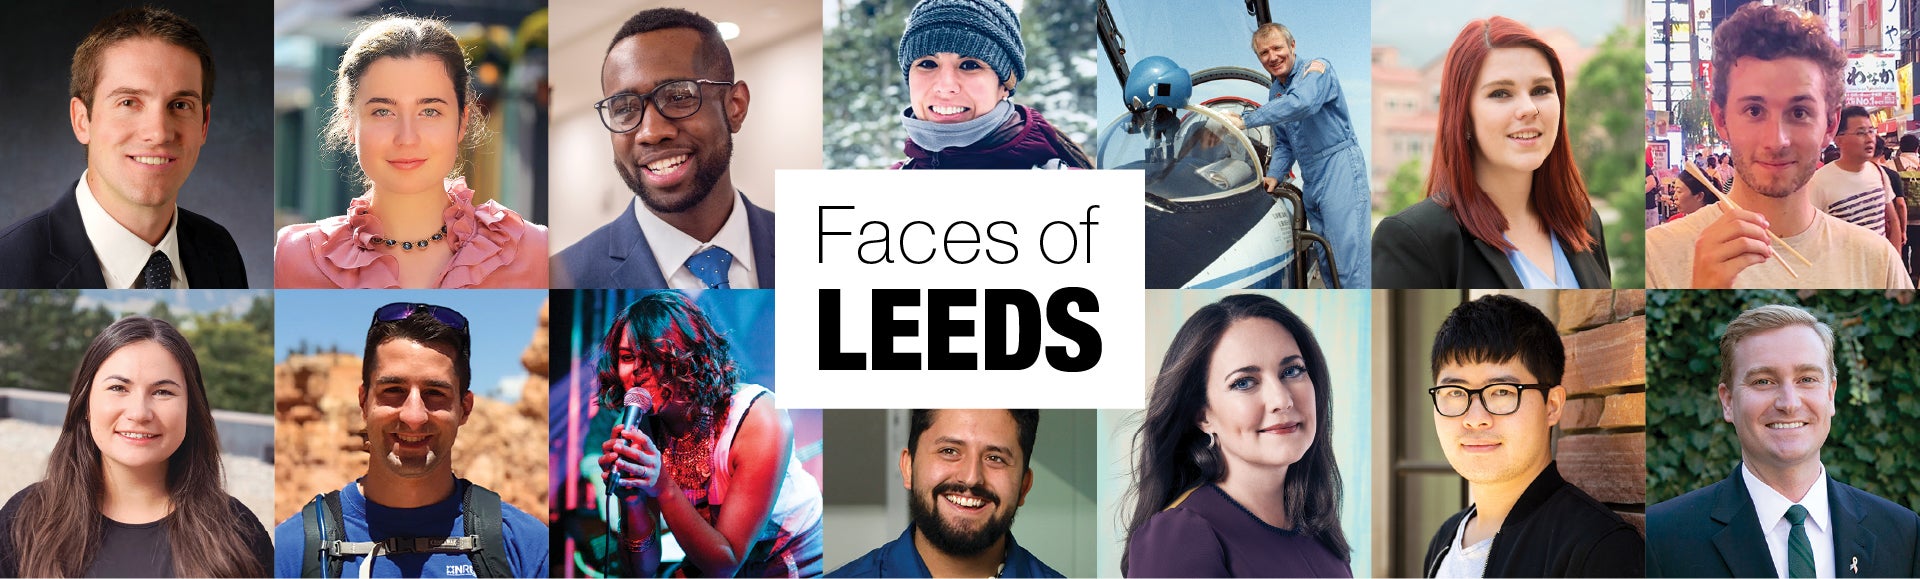 Faces of Leeds